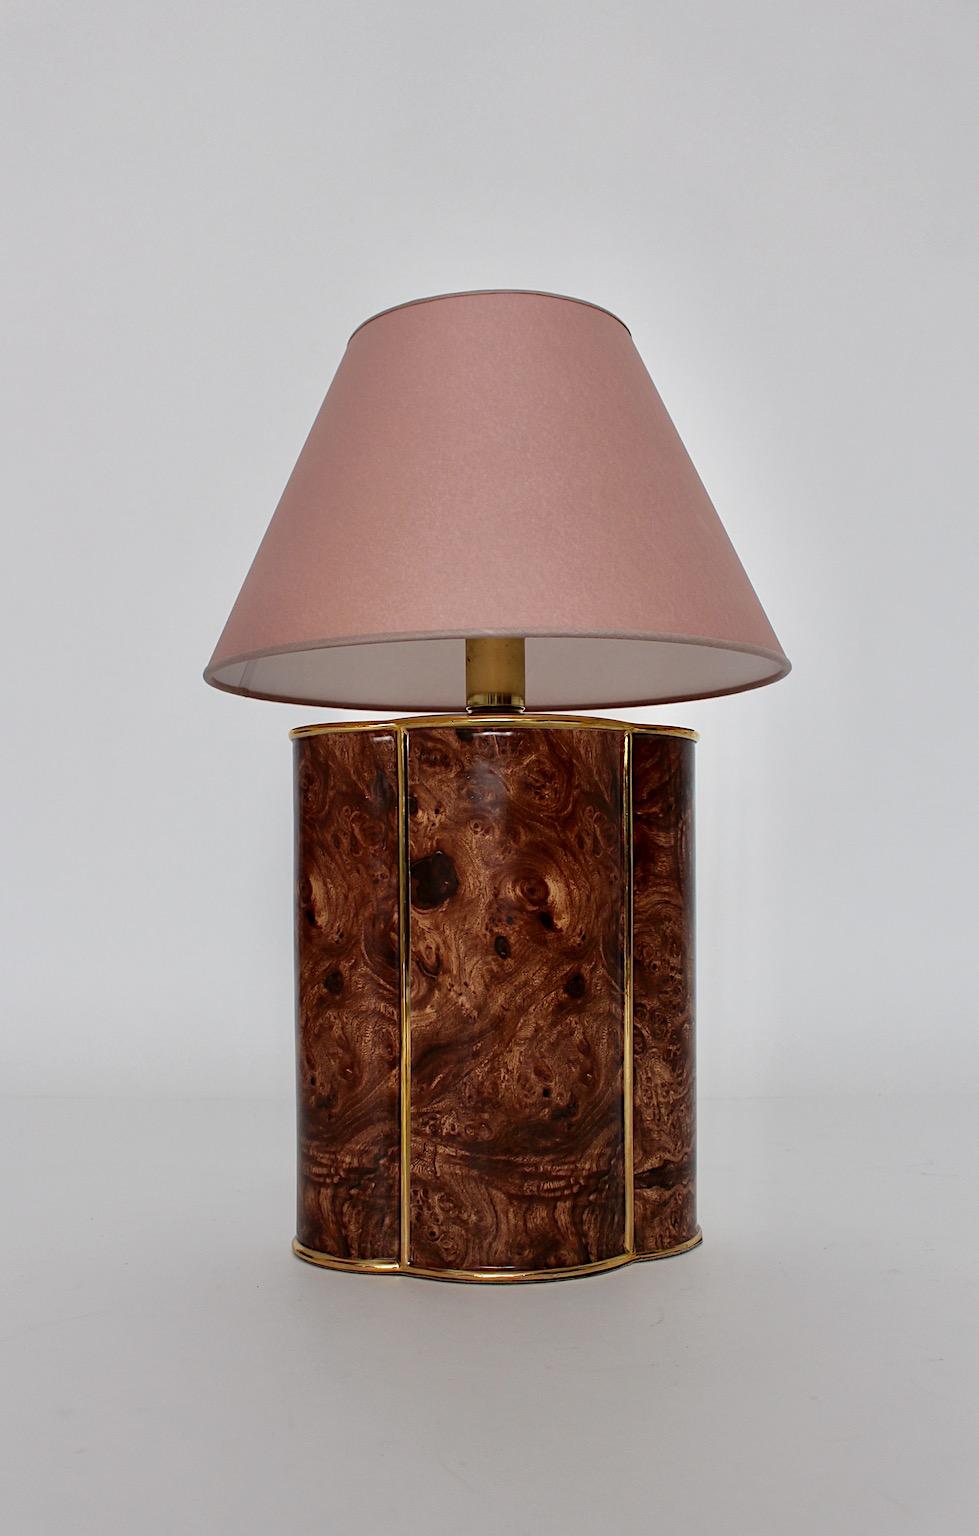 Modern vintage table lamp from ceramic in brown gold colors designed and manufactured in Italy, 1990s.
A beautiful table lamp from brown colored ceramic wood grain - like with golden details and a new handmade lamp shade from paper in soft dusty